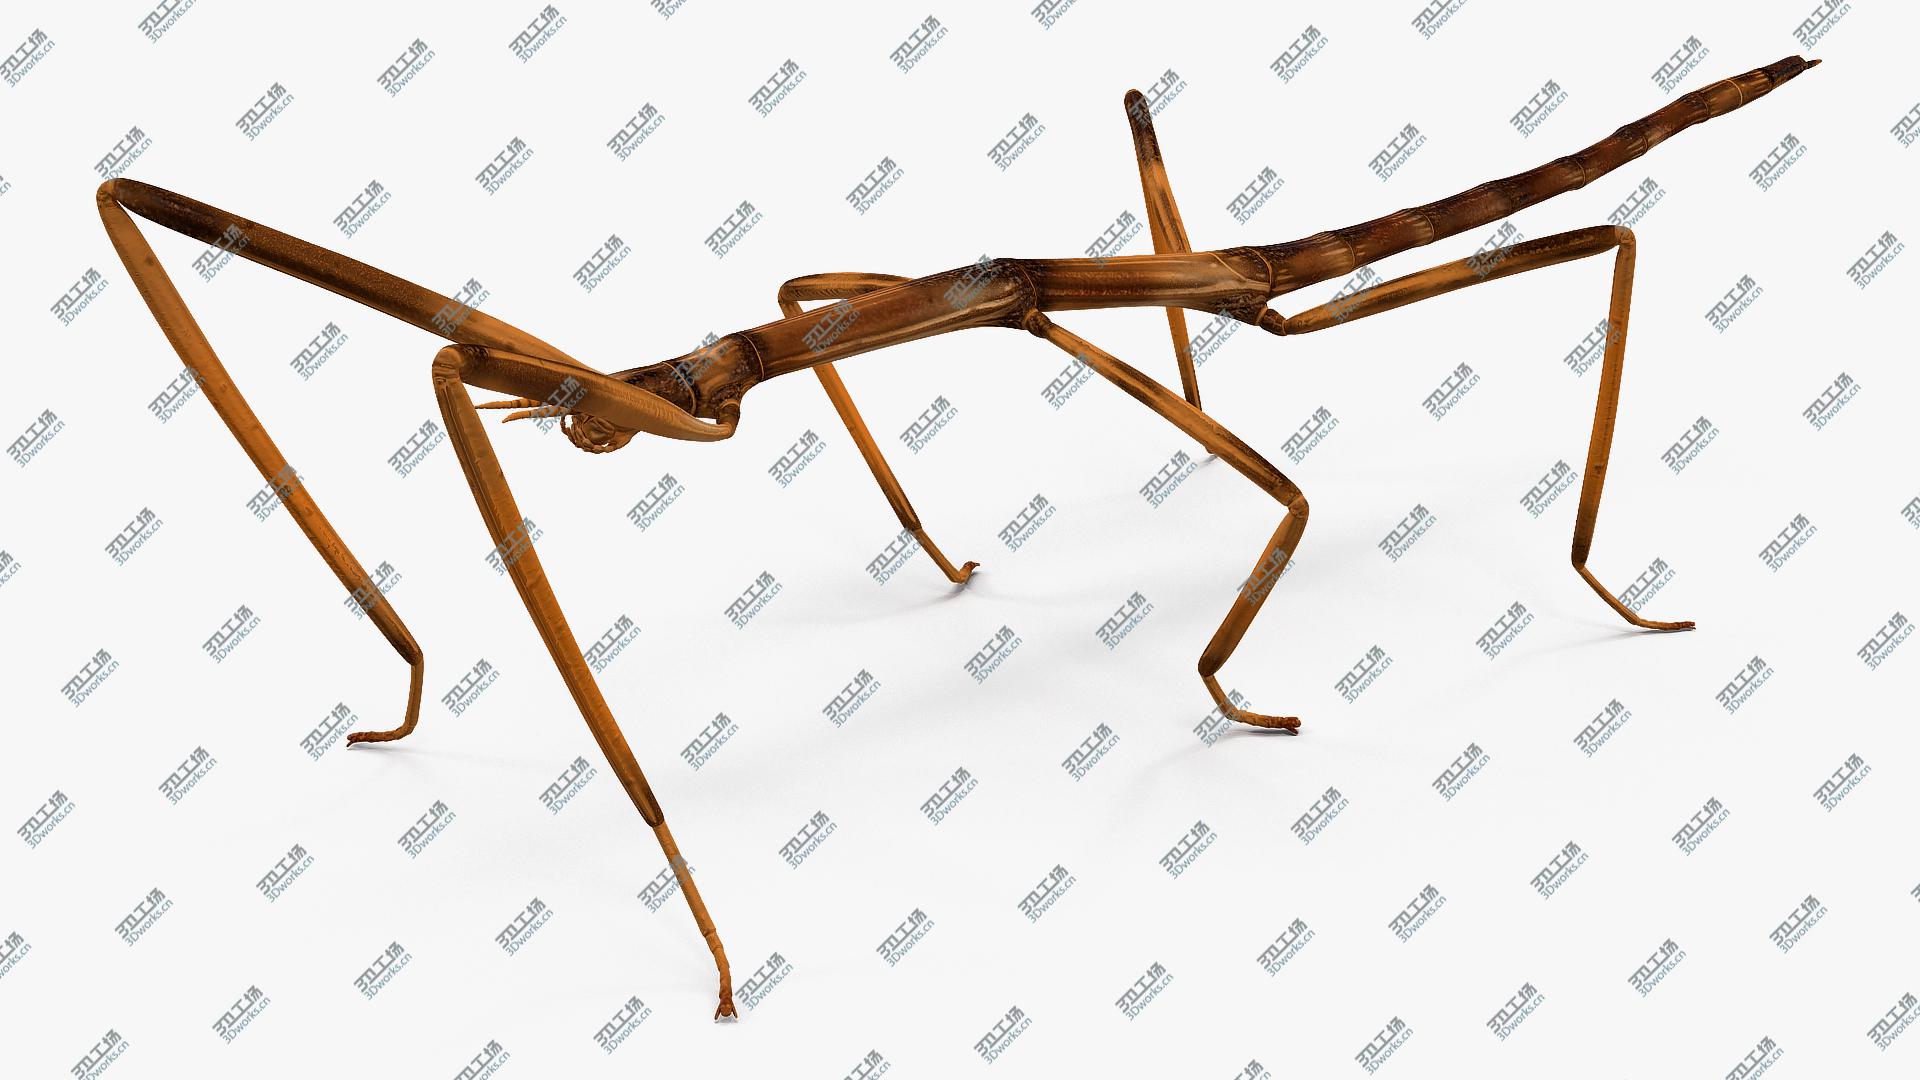 images/goods_img/2021040162/3D Stick Insect Brown Rigged model/2.jpg